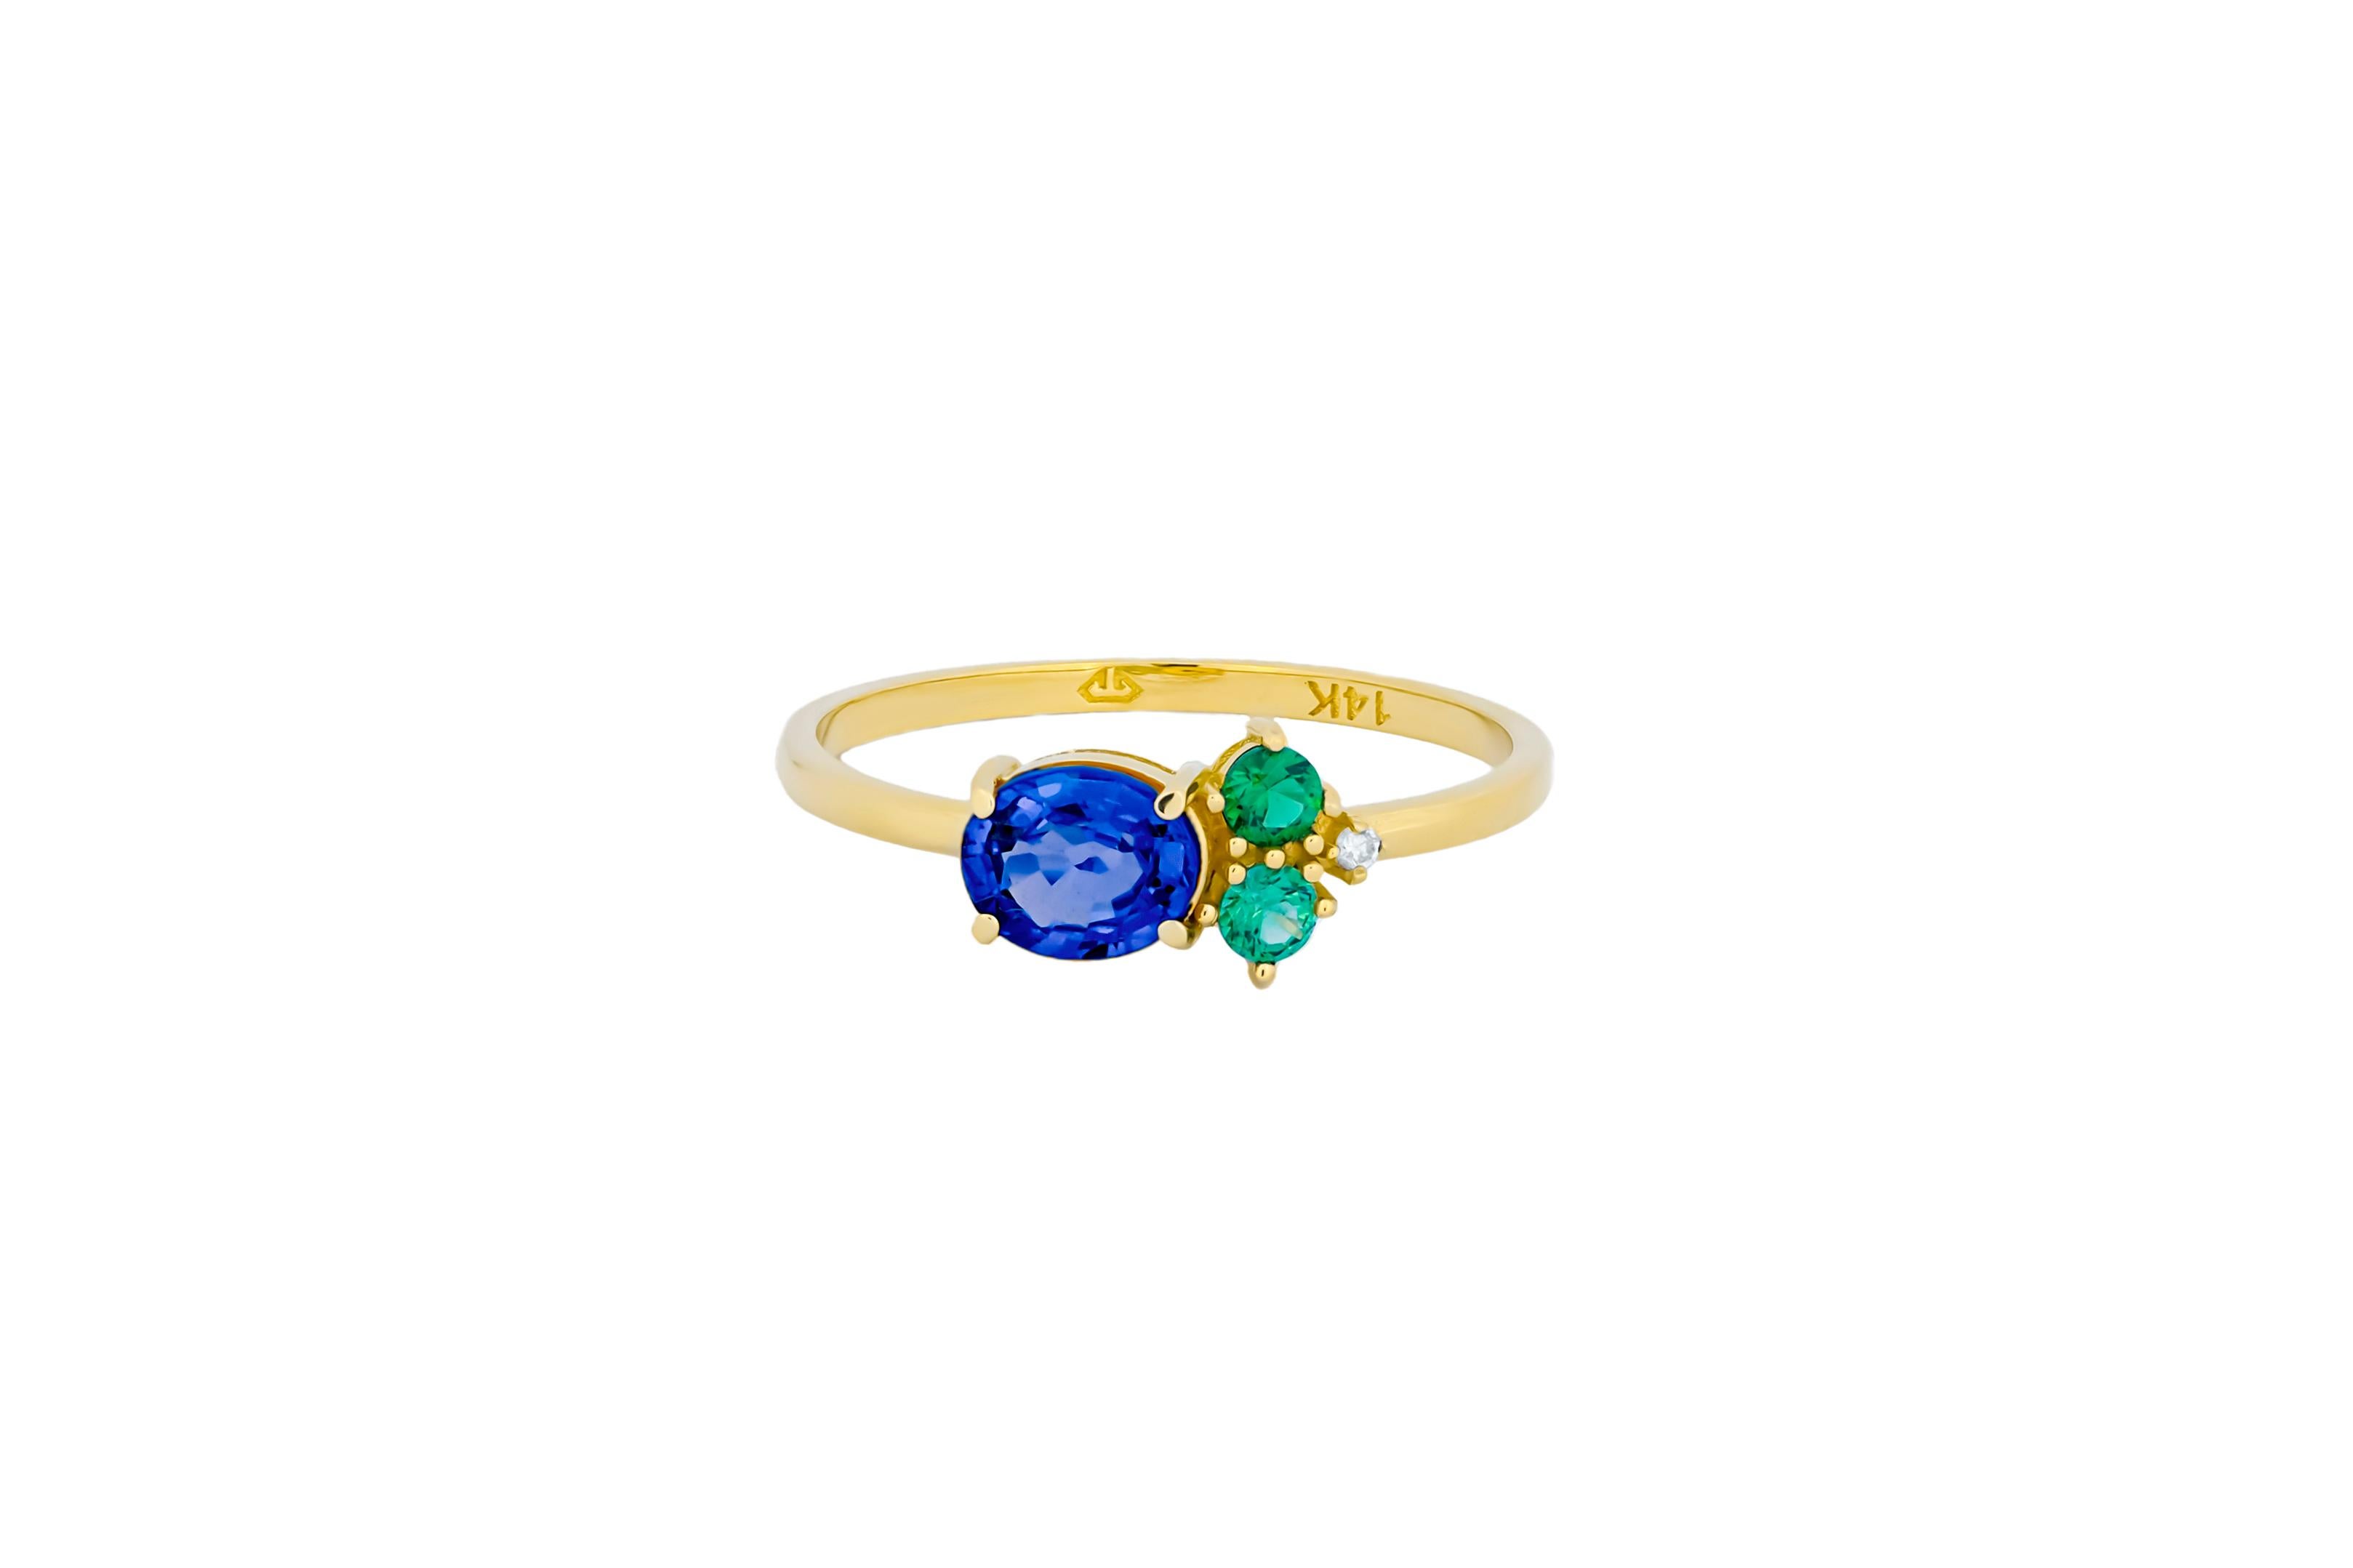 For Sale:  Oval sapphire, tsavorite and diamonds 14k gold ring. 6